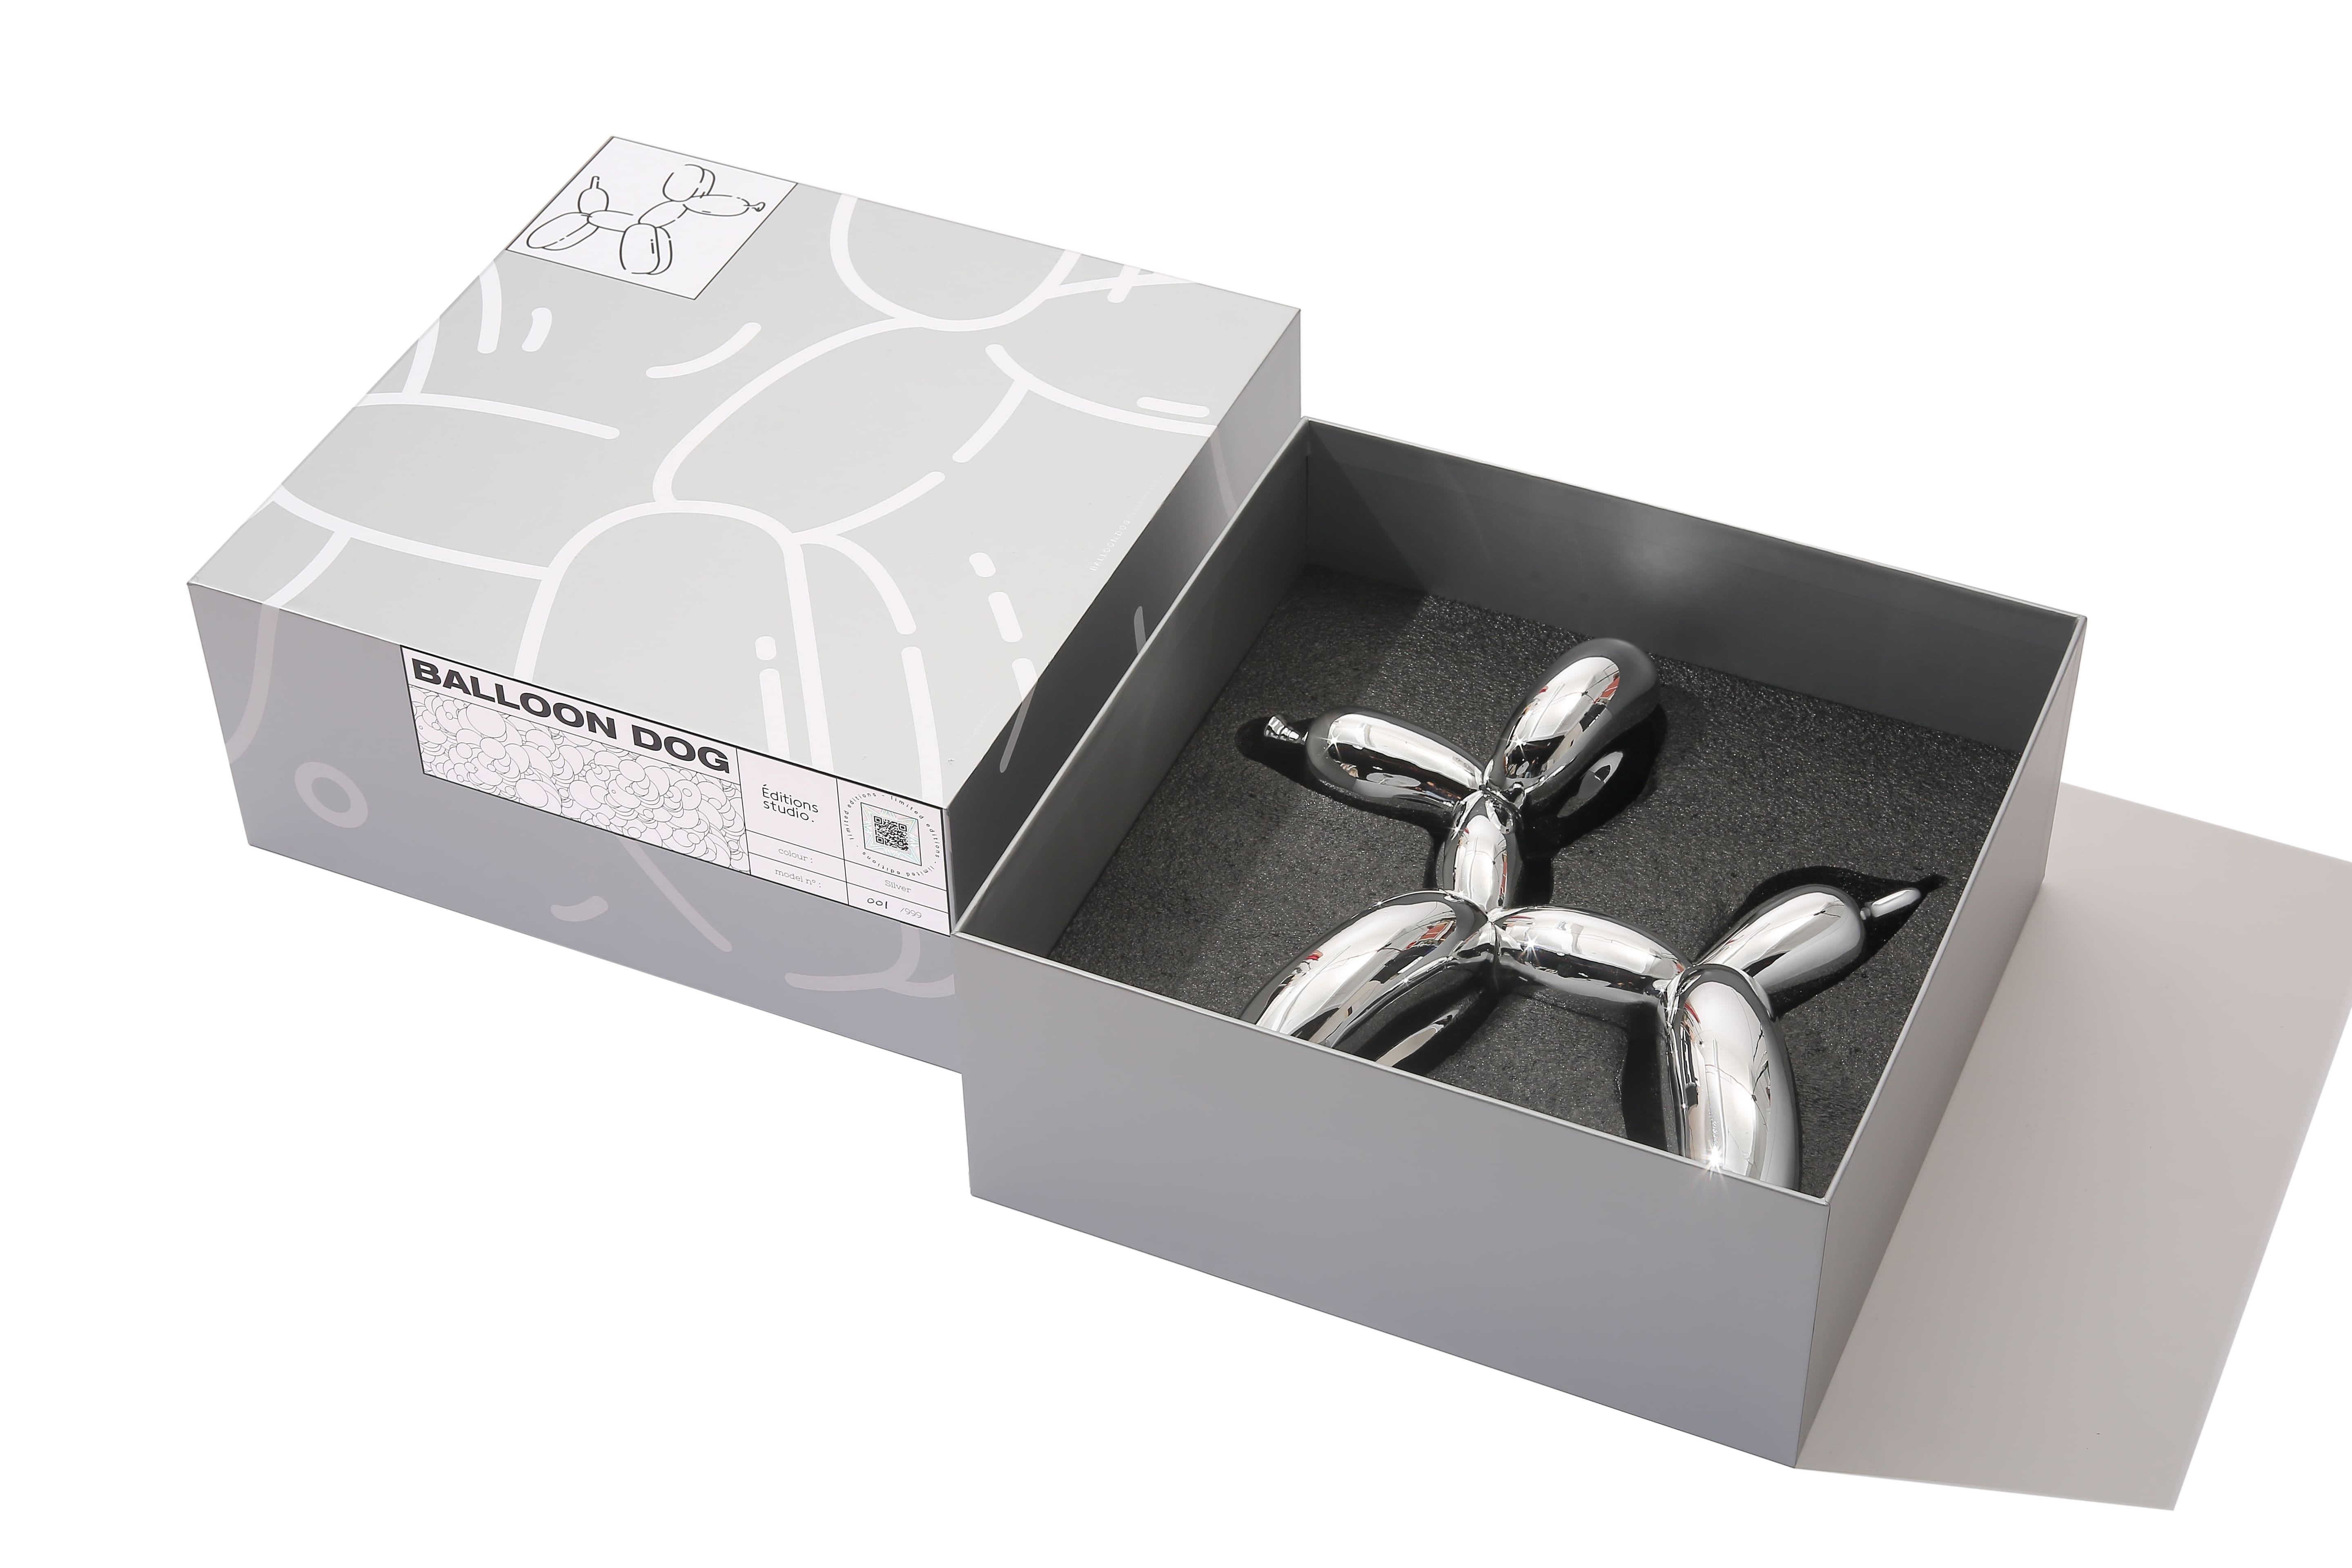 A rare metal version (Zinc Alloy) of the famous ”Balloon Dog” by Editions Studio
Delivered in its original box with hologram and unique QR code linked to its digital CoA
From a limited edition of 999, numbered under the foot of the dog, logo ÉS